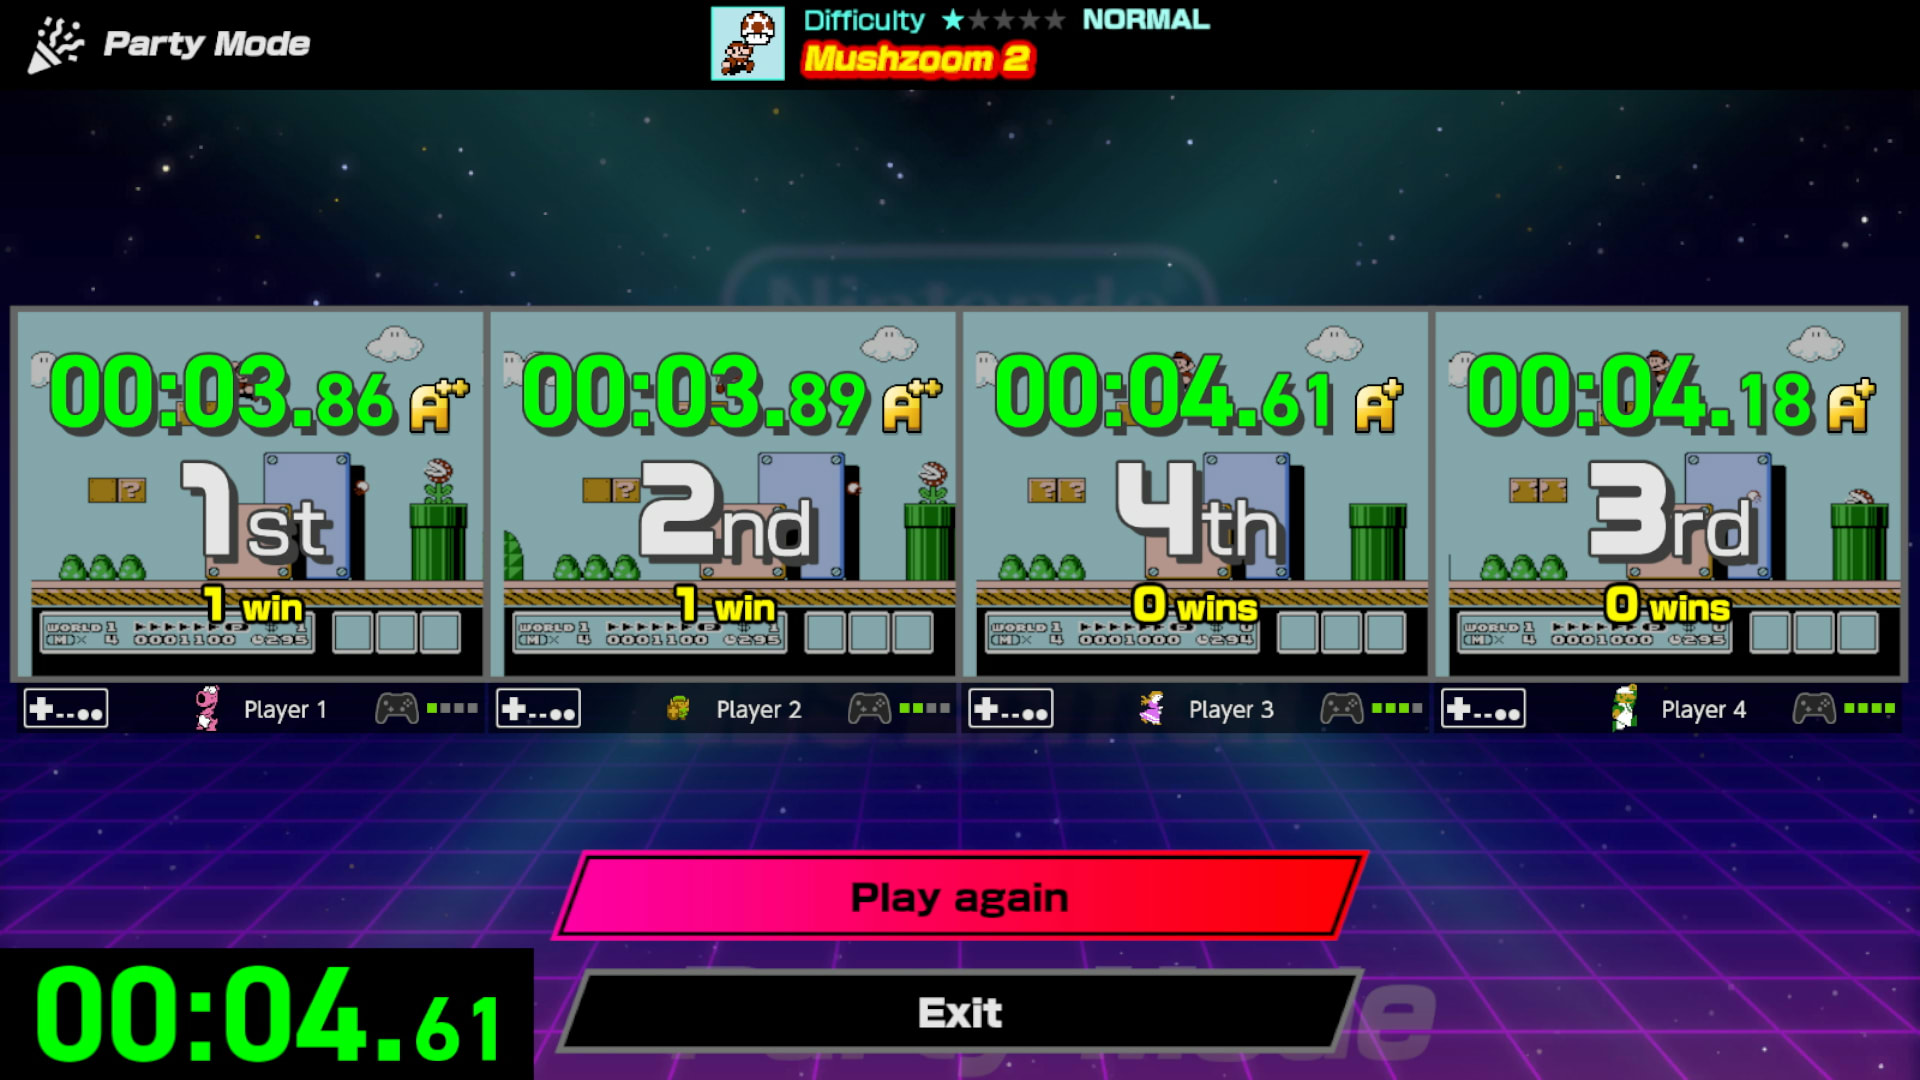 Four players***    compete at the same time. Each player has their own portion of the screen. At the end of the challenge, the player’s ranking, time, and letter rating are shown for each player.